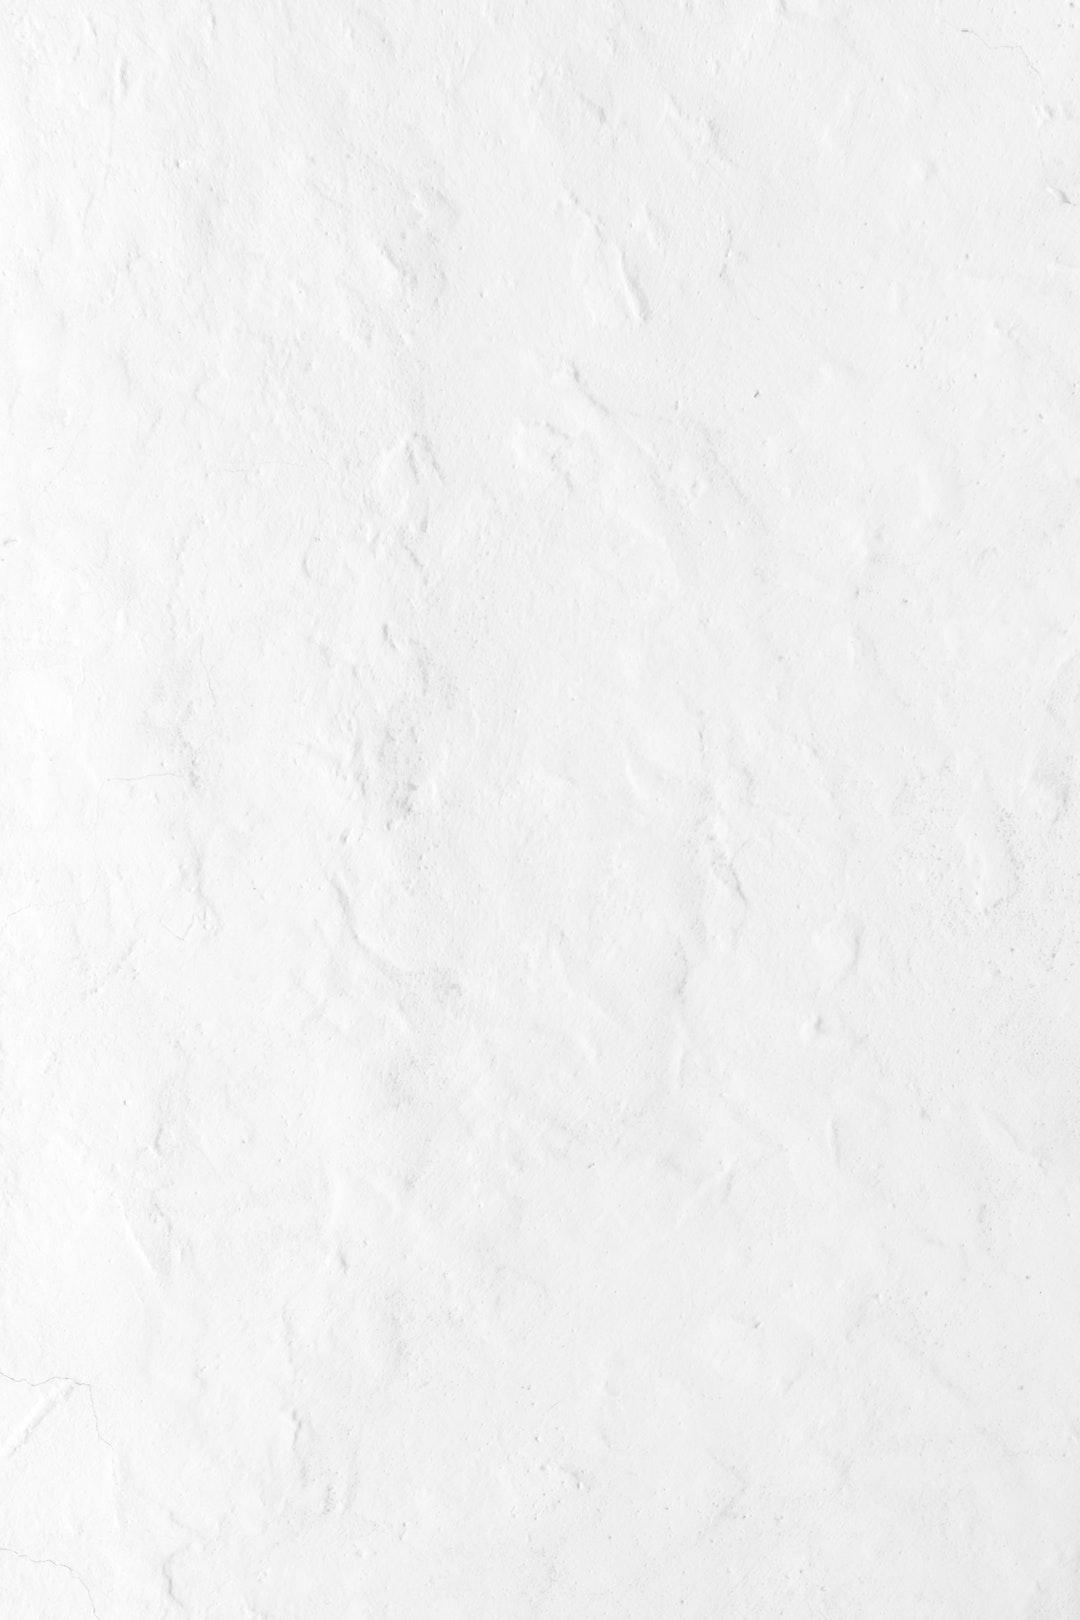 White Background Image: Download HD Background